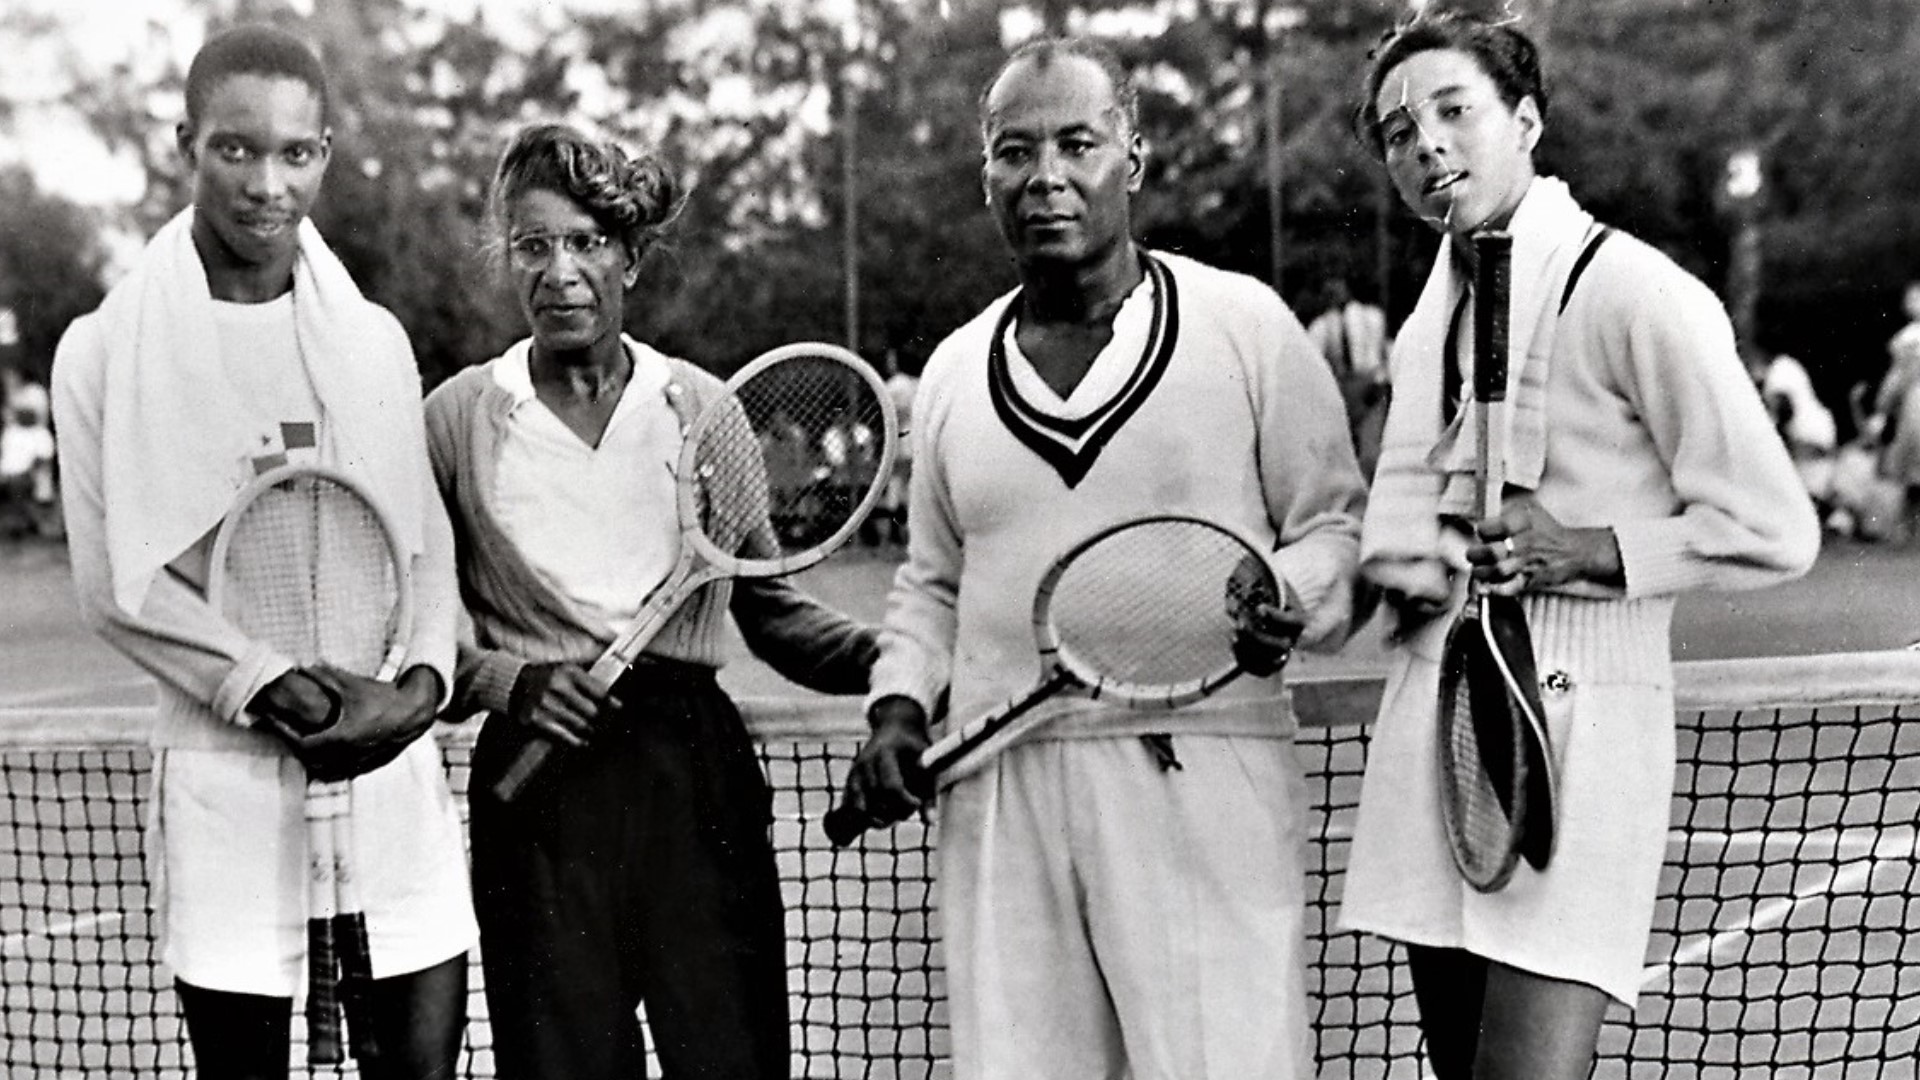 Kristen and Ellen honor Dr. Robert Walter "Whirlwind" Johnson and how he made tennis accessible for African-Americans including Arthur Ashe and Althea Gibson.